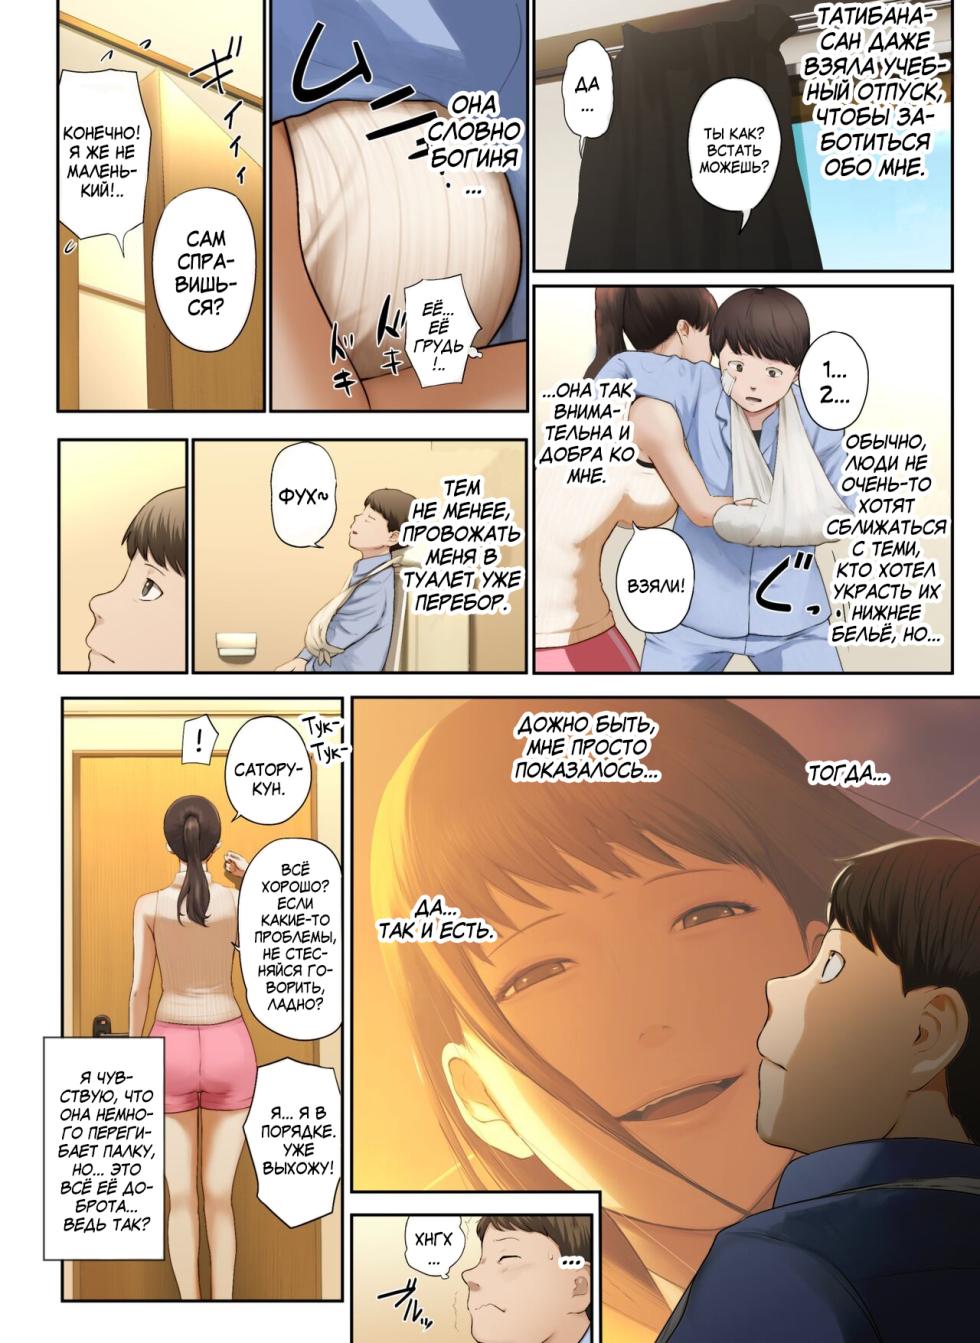 [Chinjao Girl. (Special G)]  Let’s Talk About the Story of A Miracle that Happened When I Stole the Underwear of the Lady Next Door - Page 14